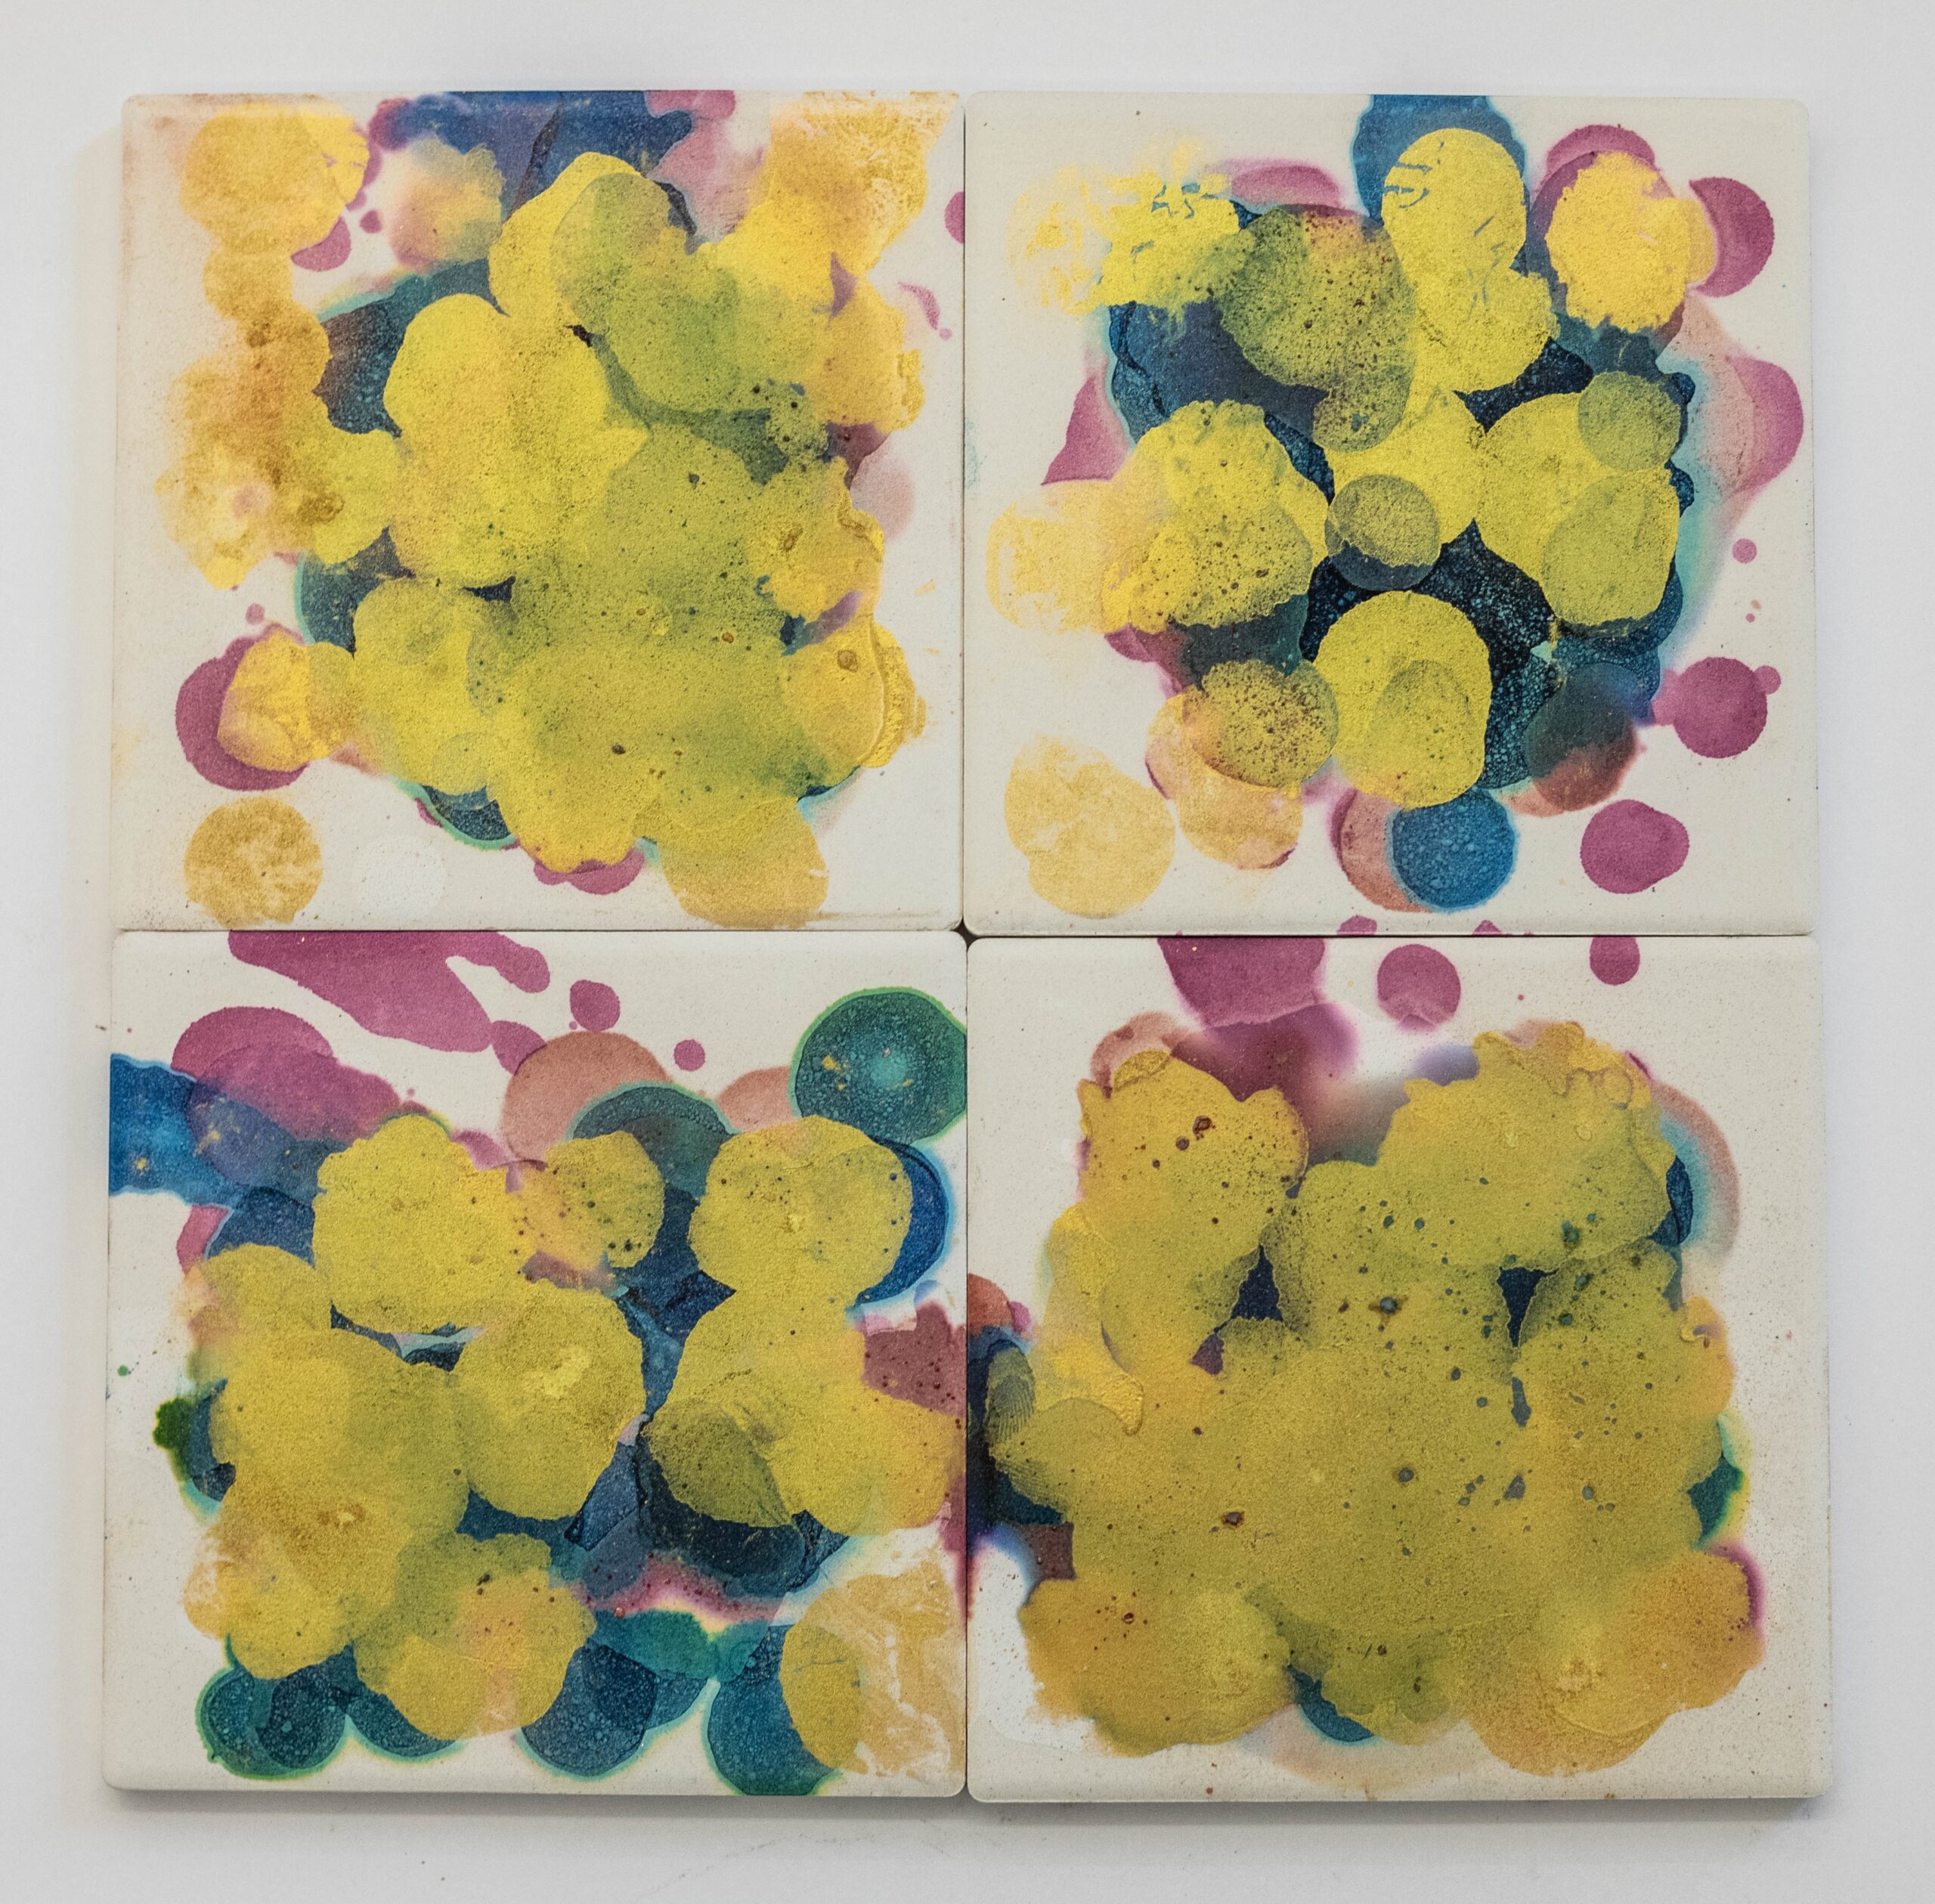 Four small tiles place together as a square and painted with circular layers of colors in yellow, blue, and magenta